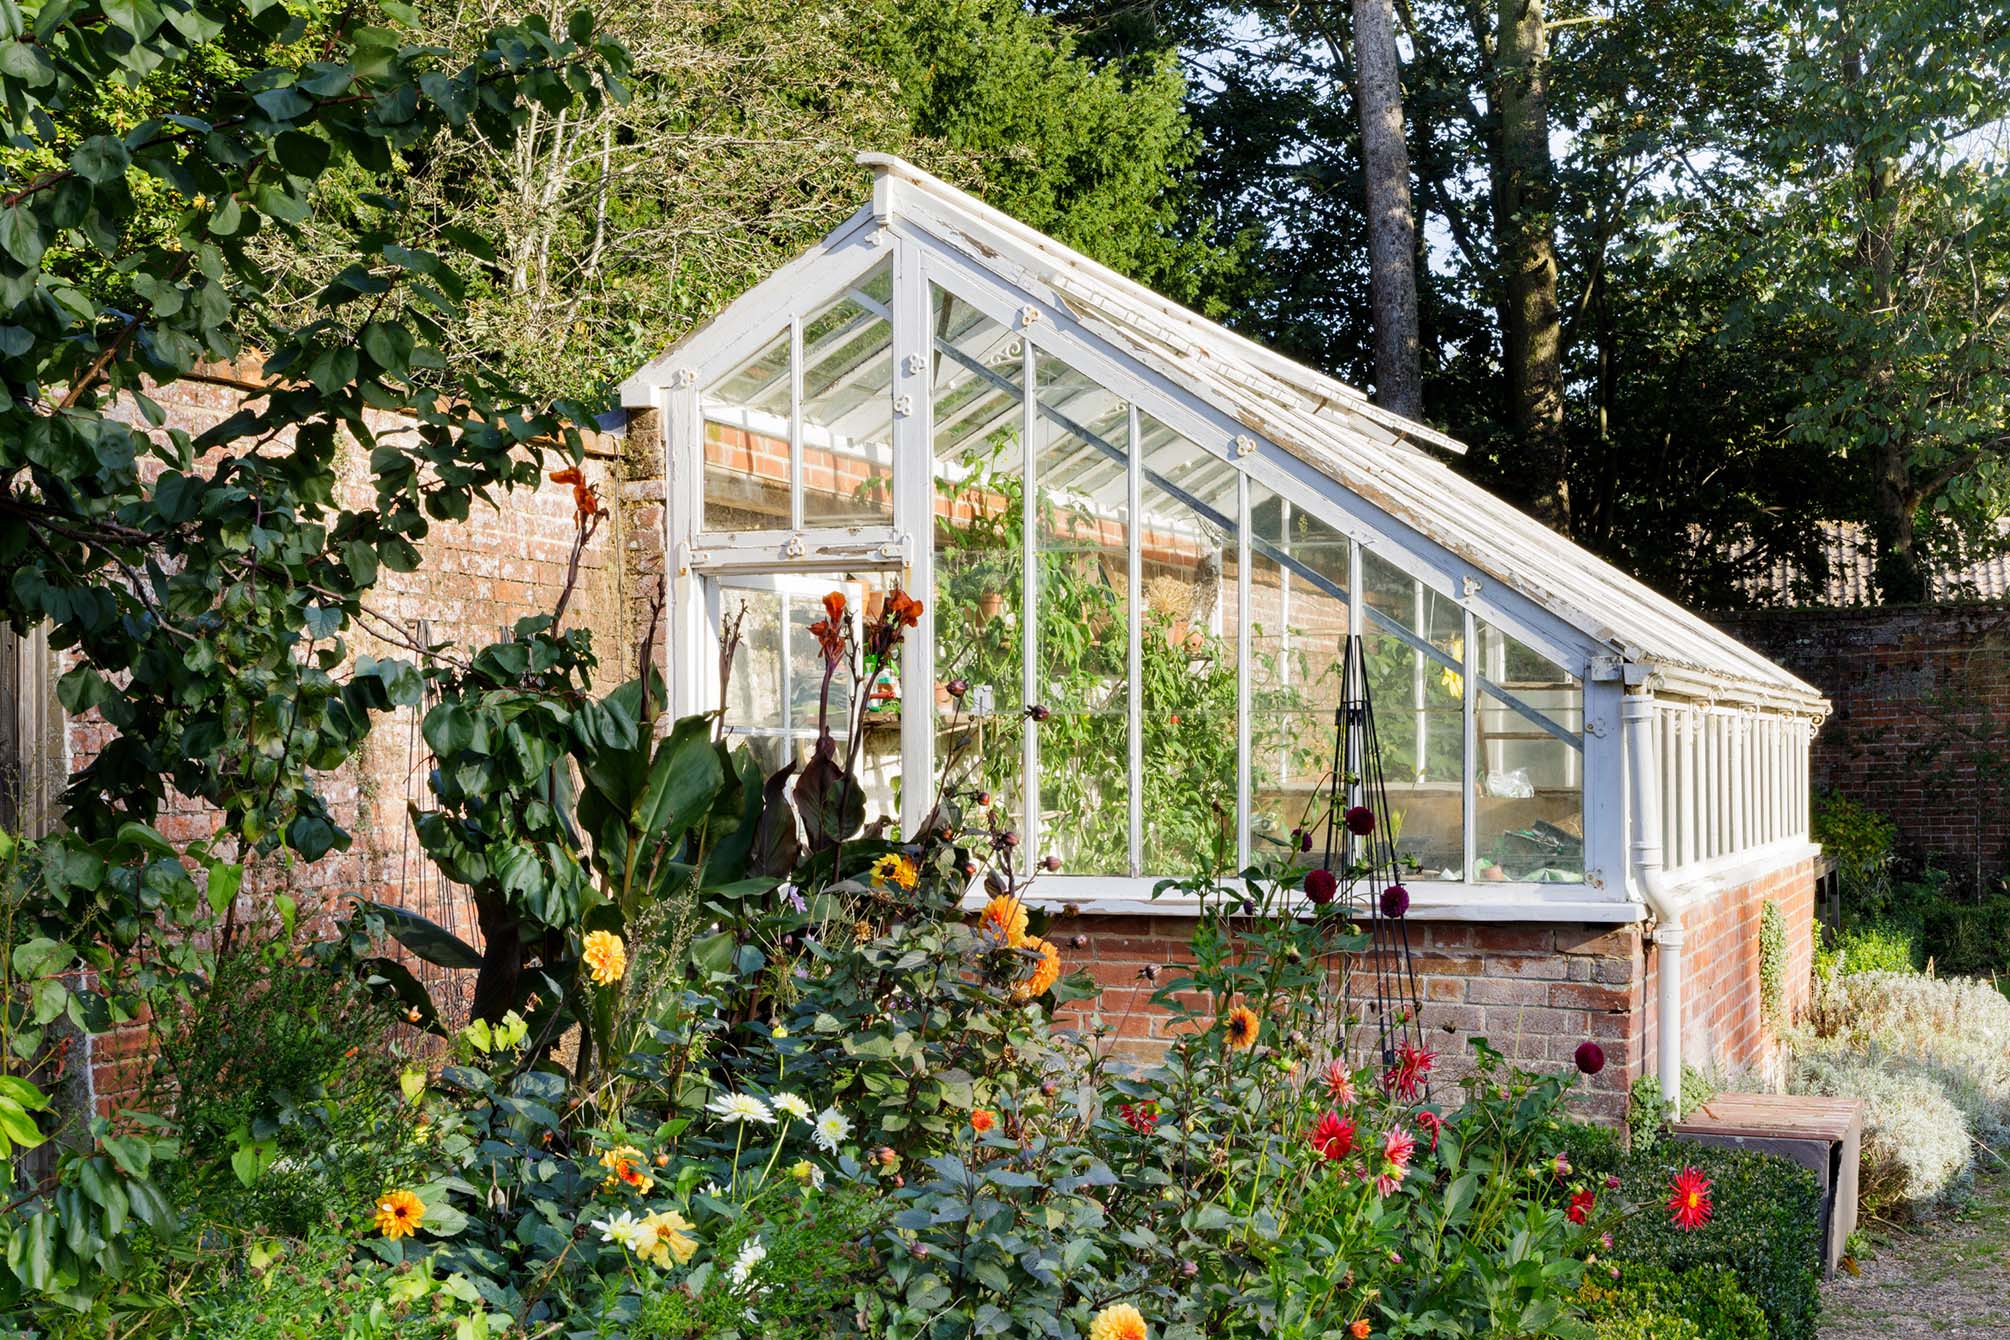 The photograph shows a greenhouse with flowerbeds in bloom with dahlias and daisies, in the foreground.